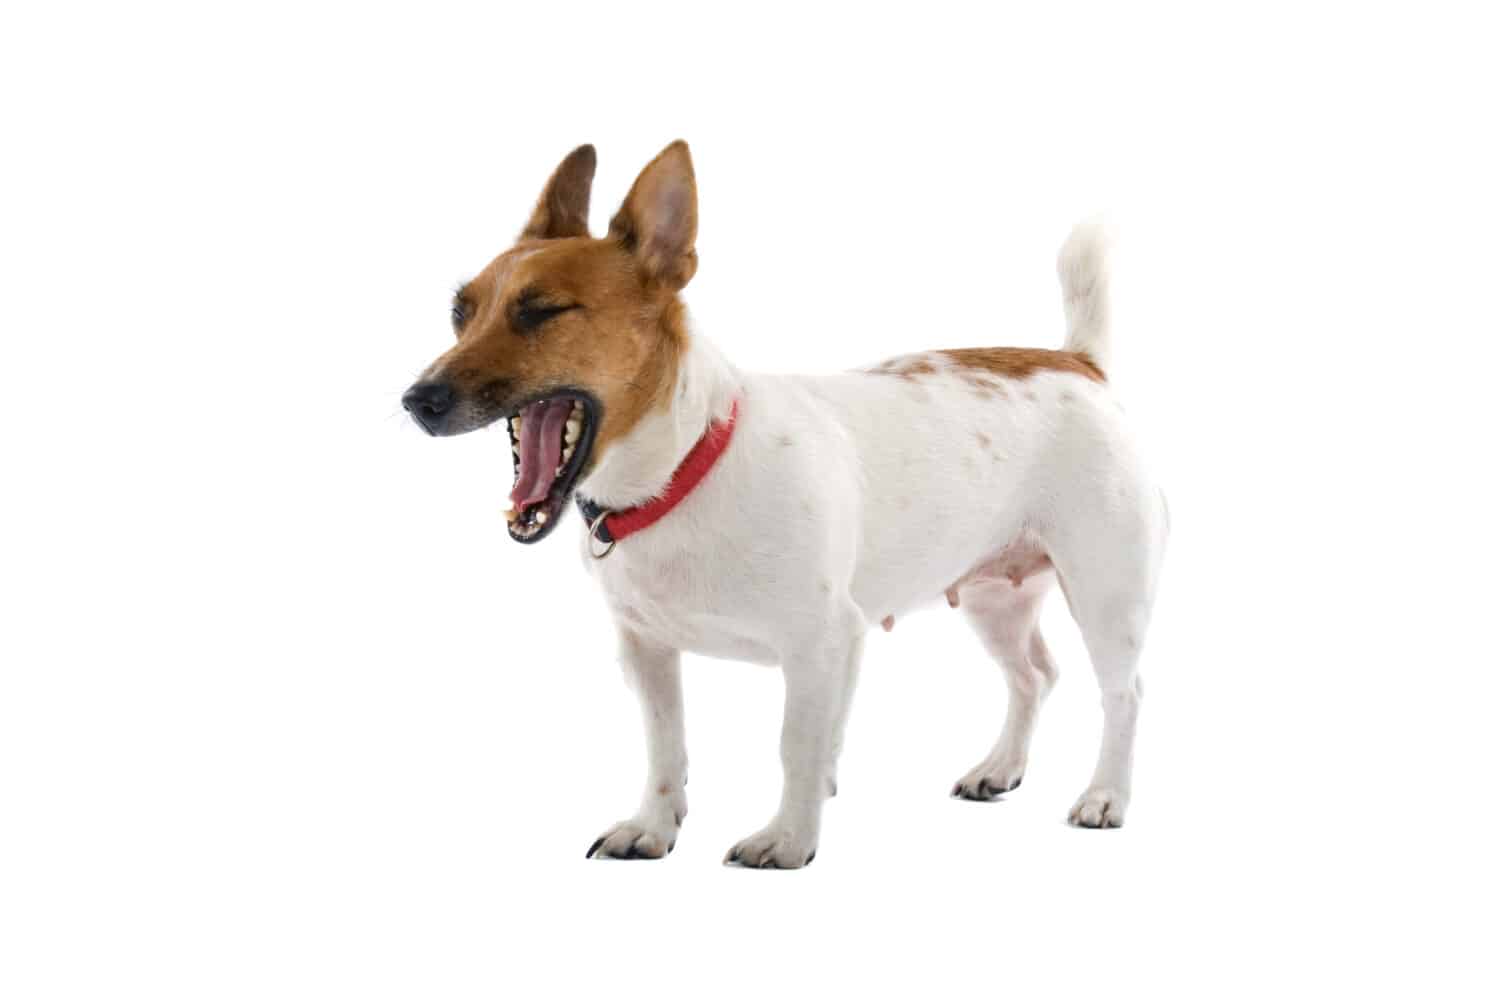  jack russel terrier isolated on a white background